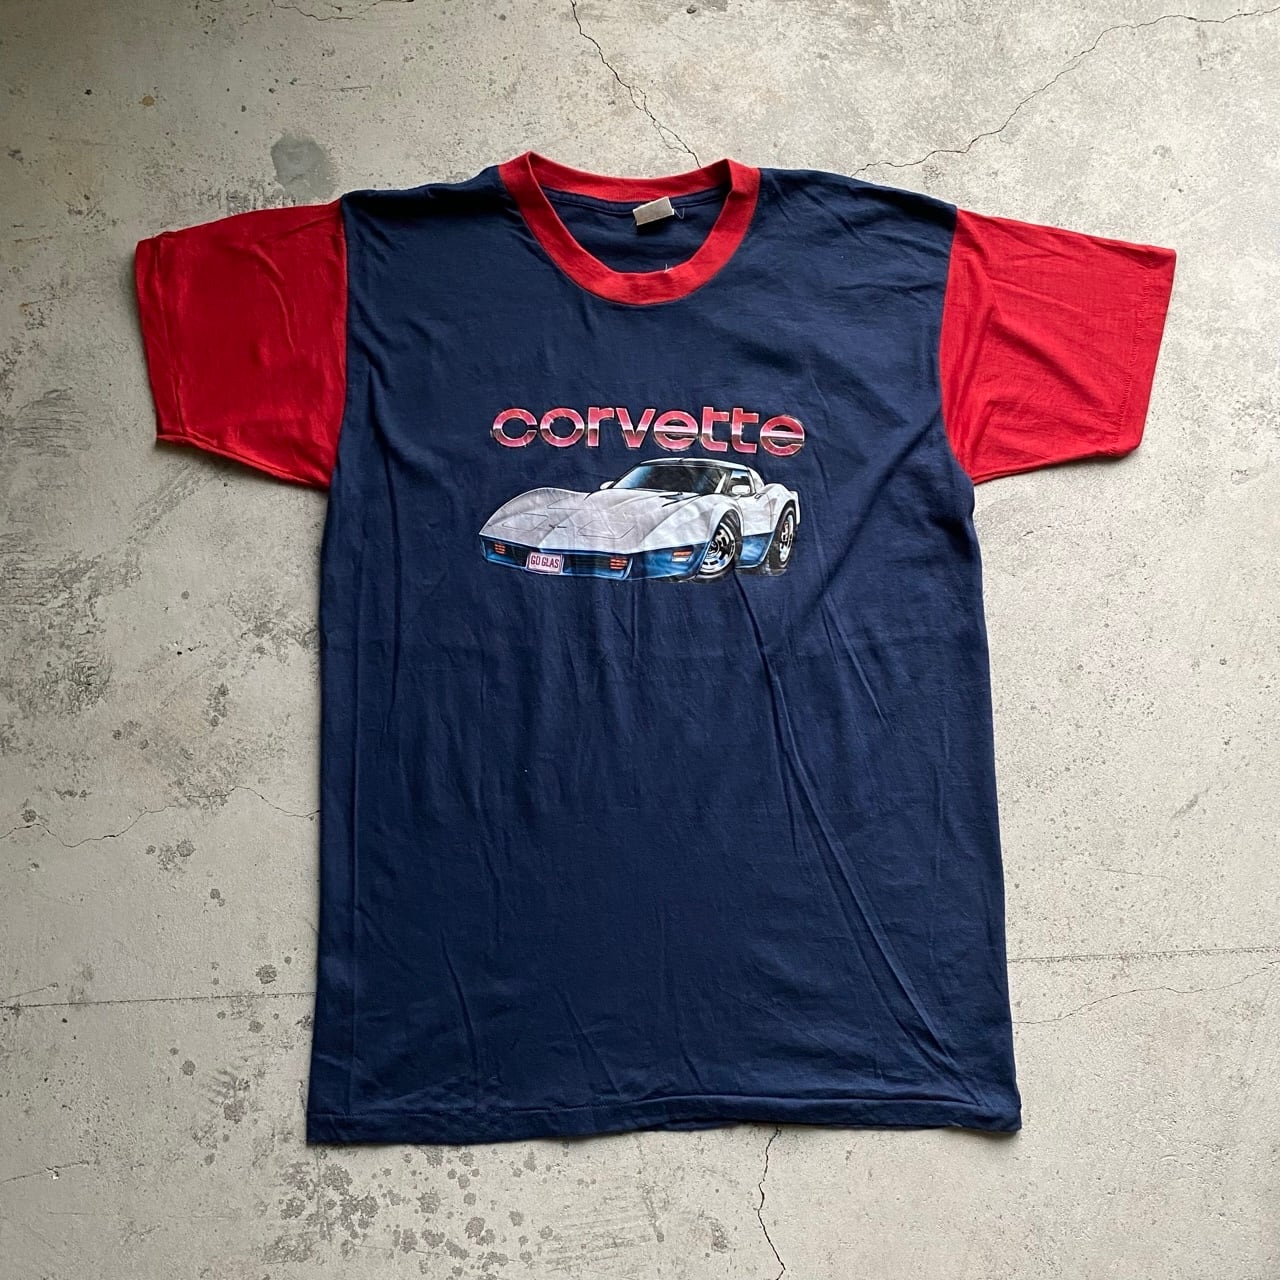 used vintage ヴィンテージ古着　80年代　コルベット　corvette Tシャツ | magazines webshop powered  by BASE